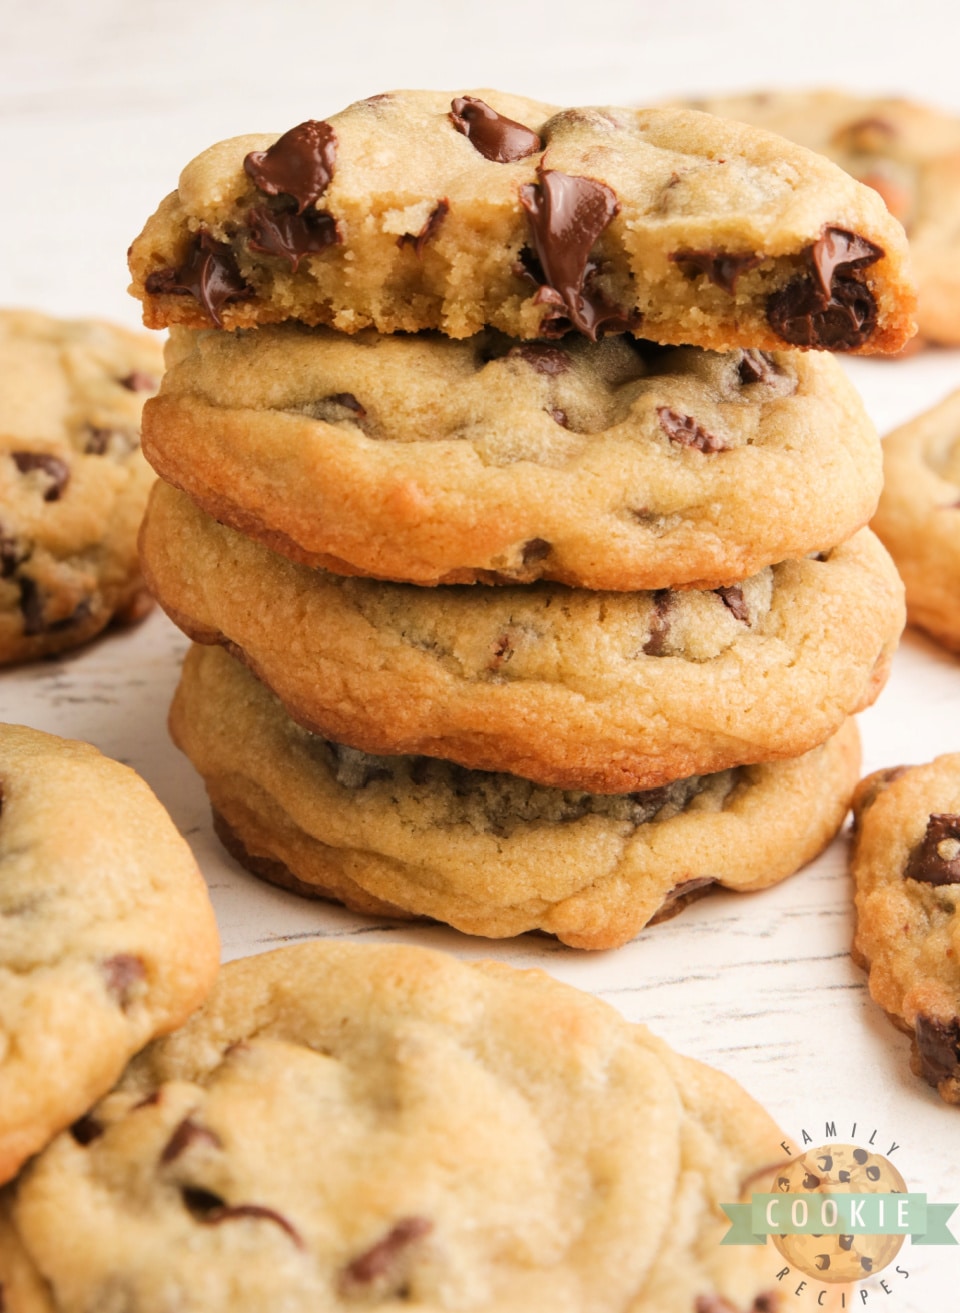 Bakery Style Chocolate Chip Cookies are large, crisp on the very outside and soft in the middle. The perfect chocolate chip cookie recipe that you've been looking for all your life!